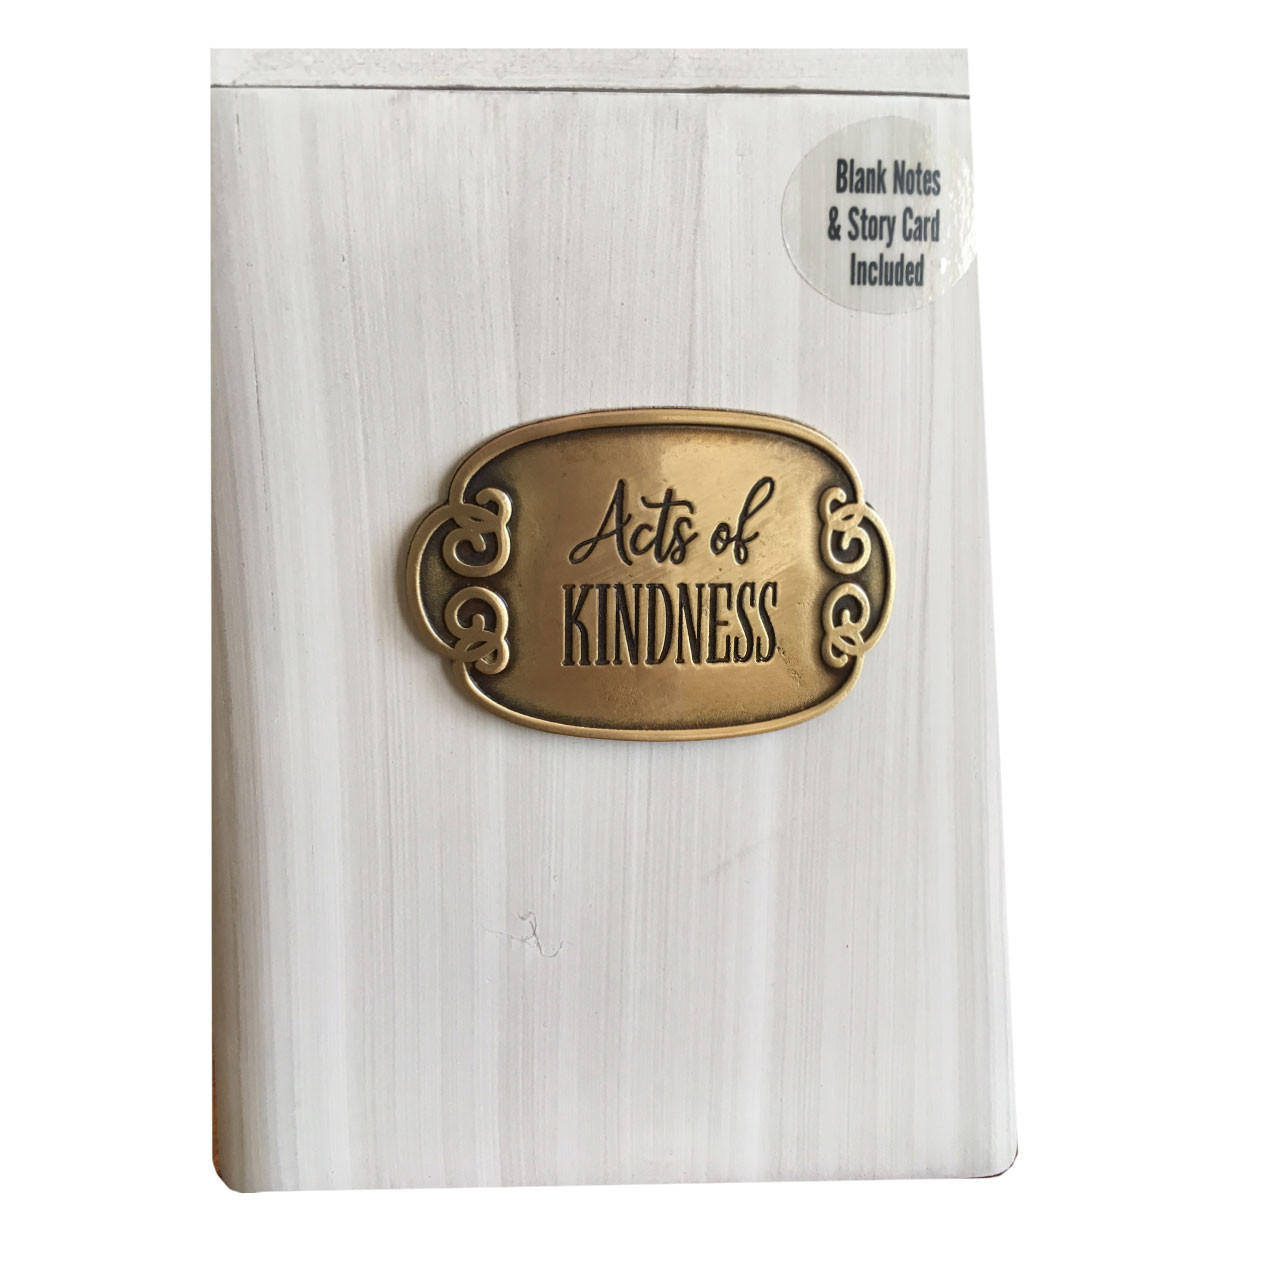 Acts of Kindness Box